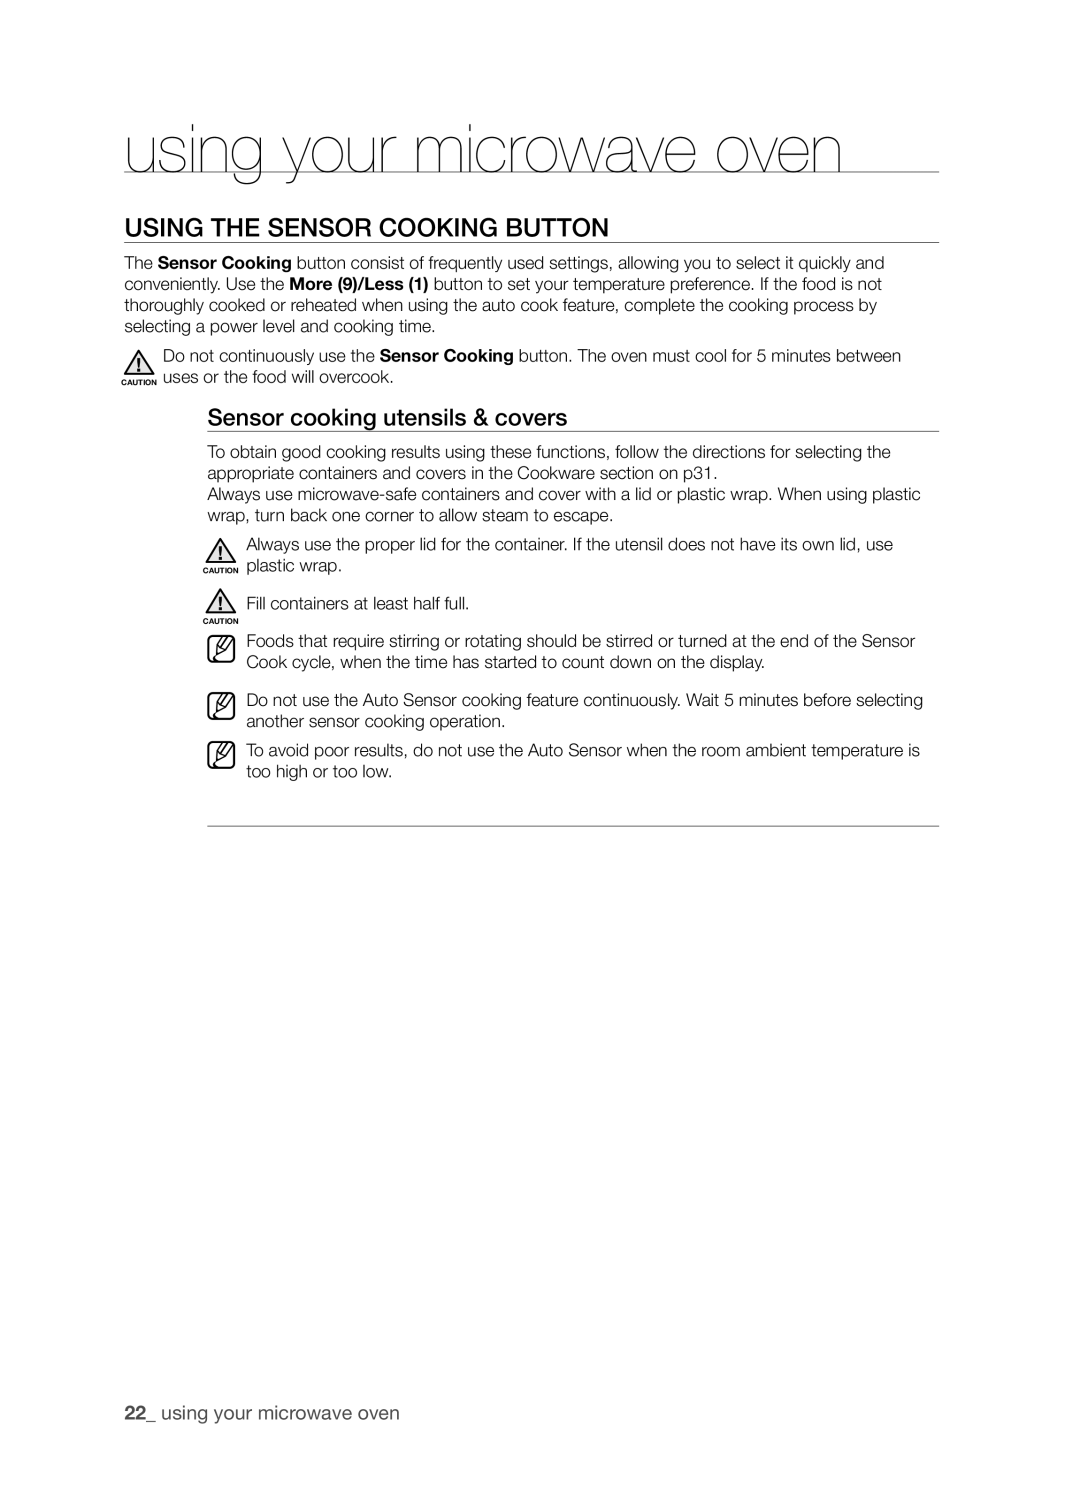 Samsung SMH9207ST user manual Using The Sensor Cooking Button, Sensor cooking utensils & covers, using your microwave oven 